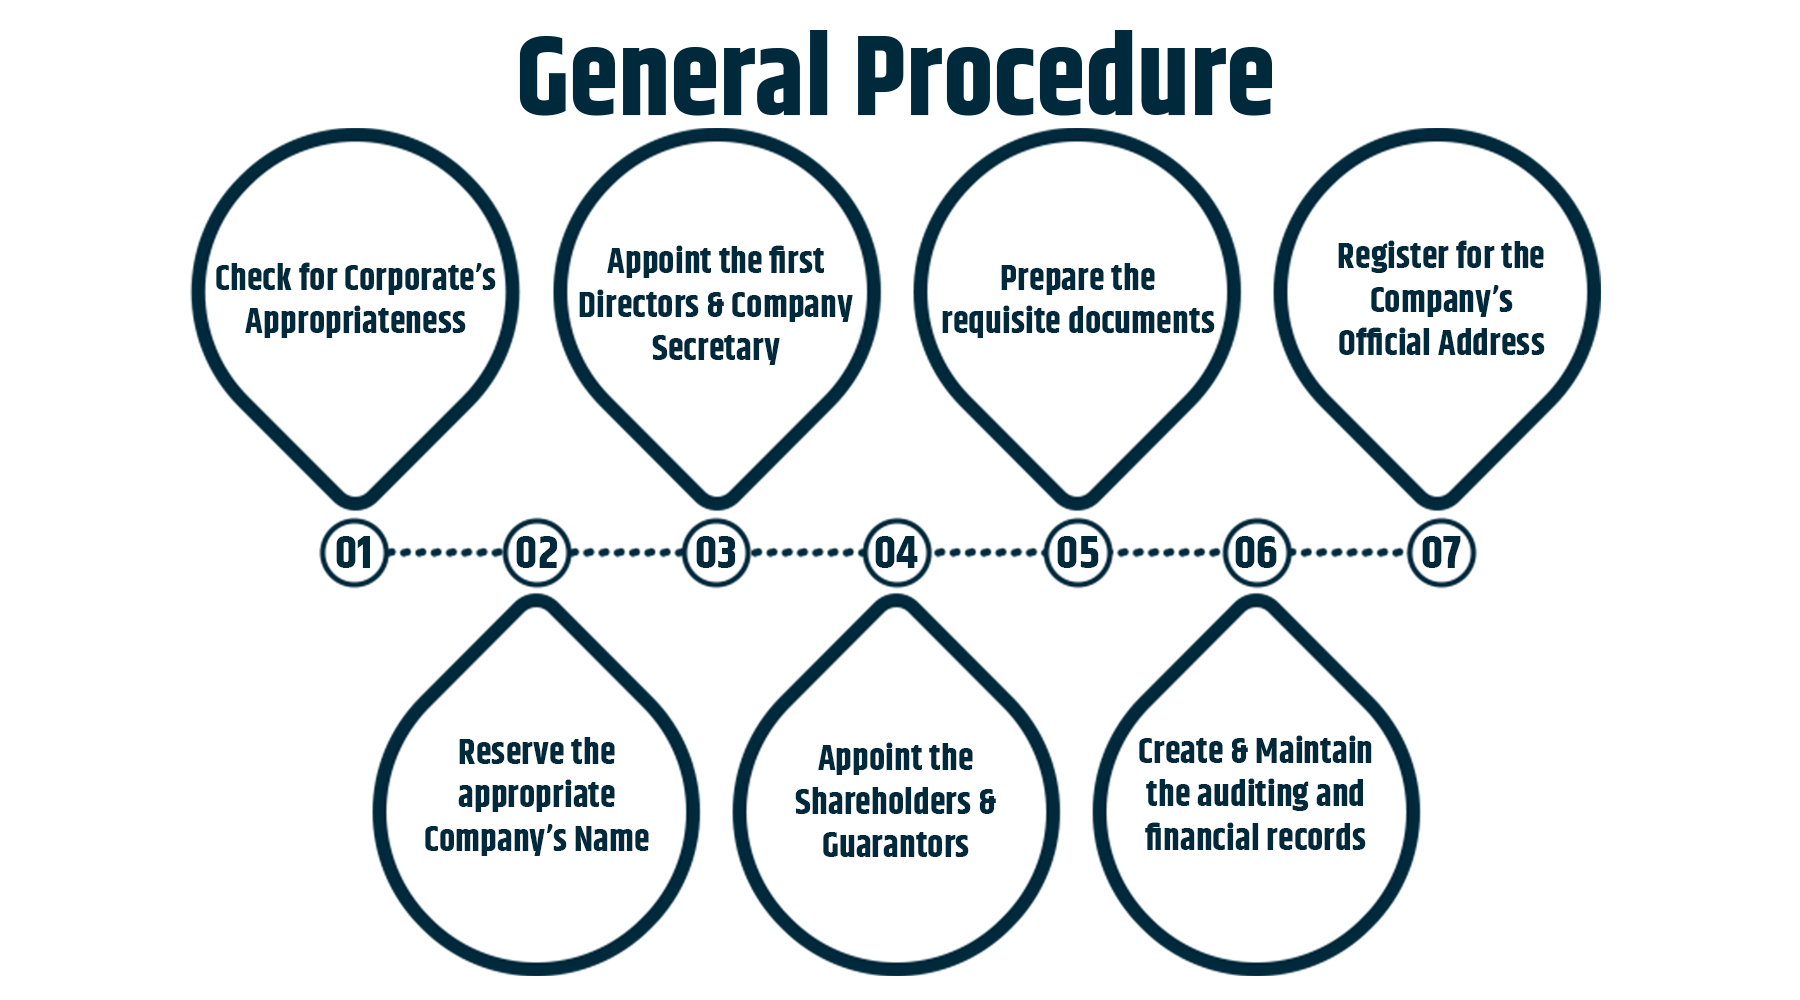 General Procedure for Company Registration in the London